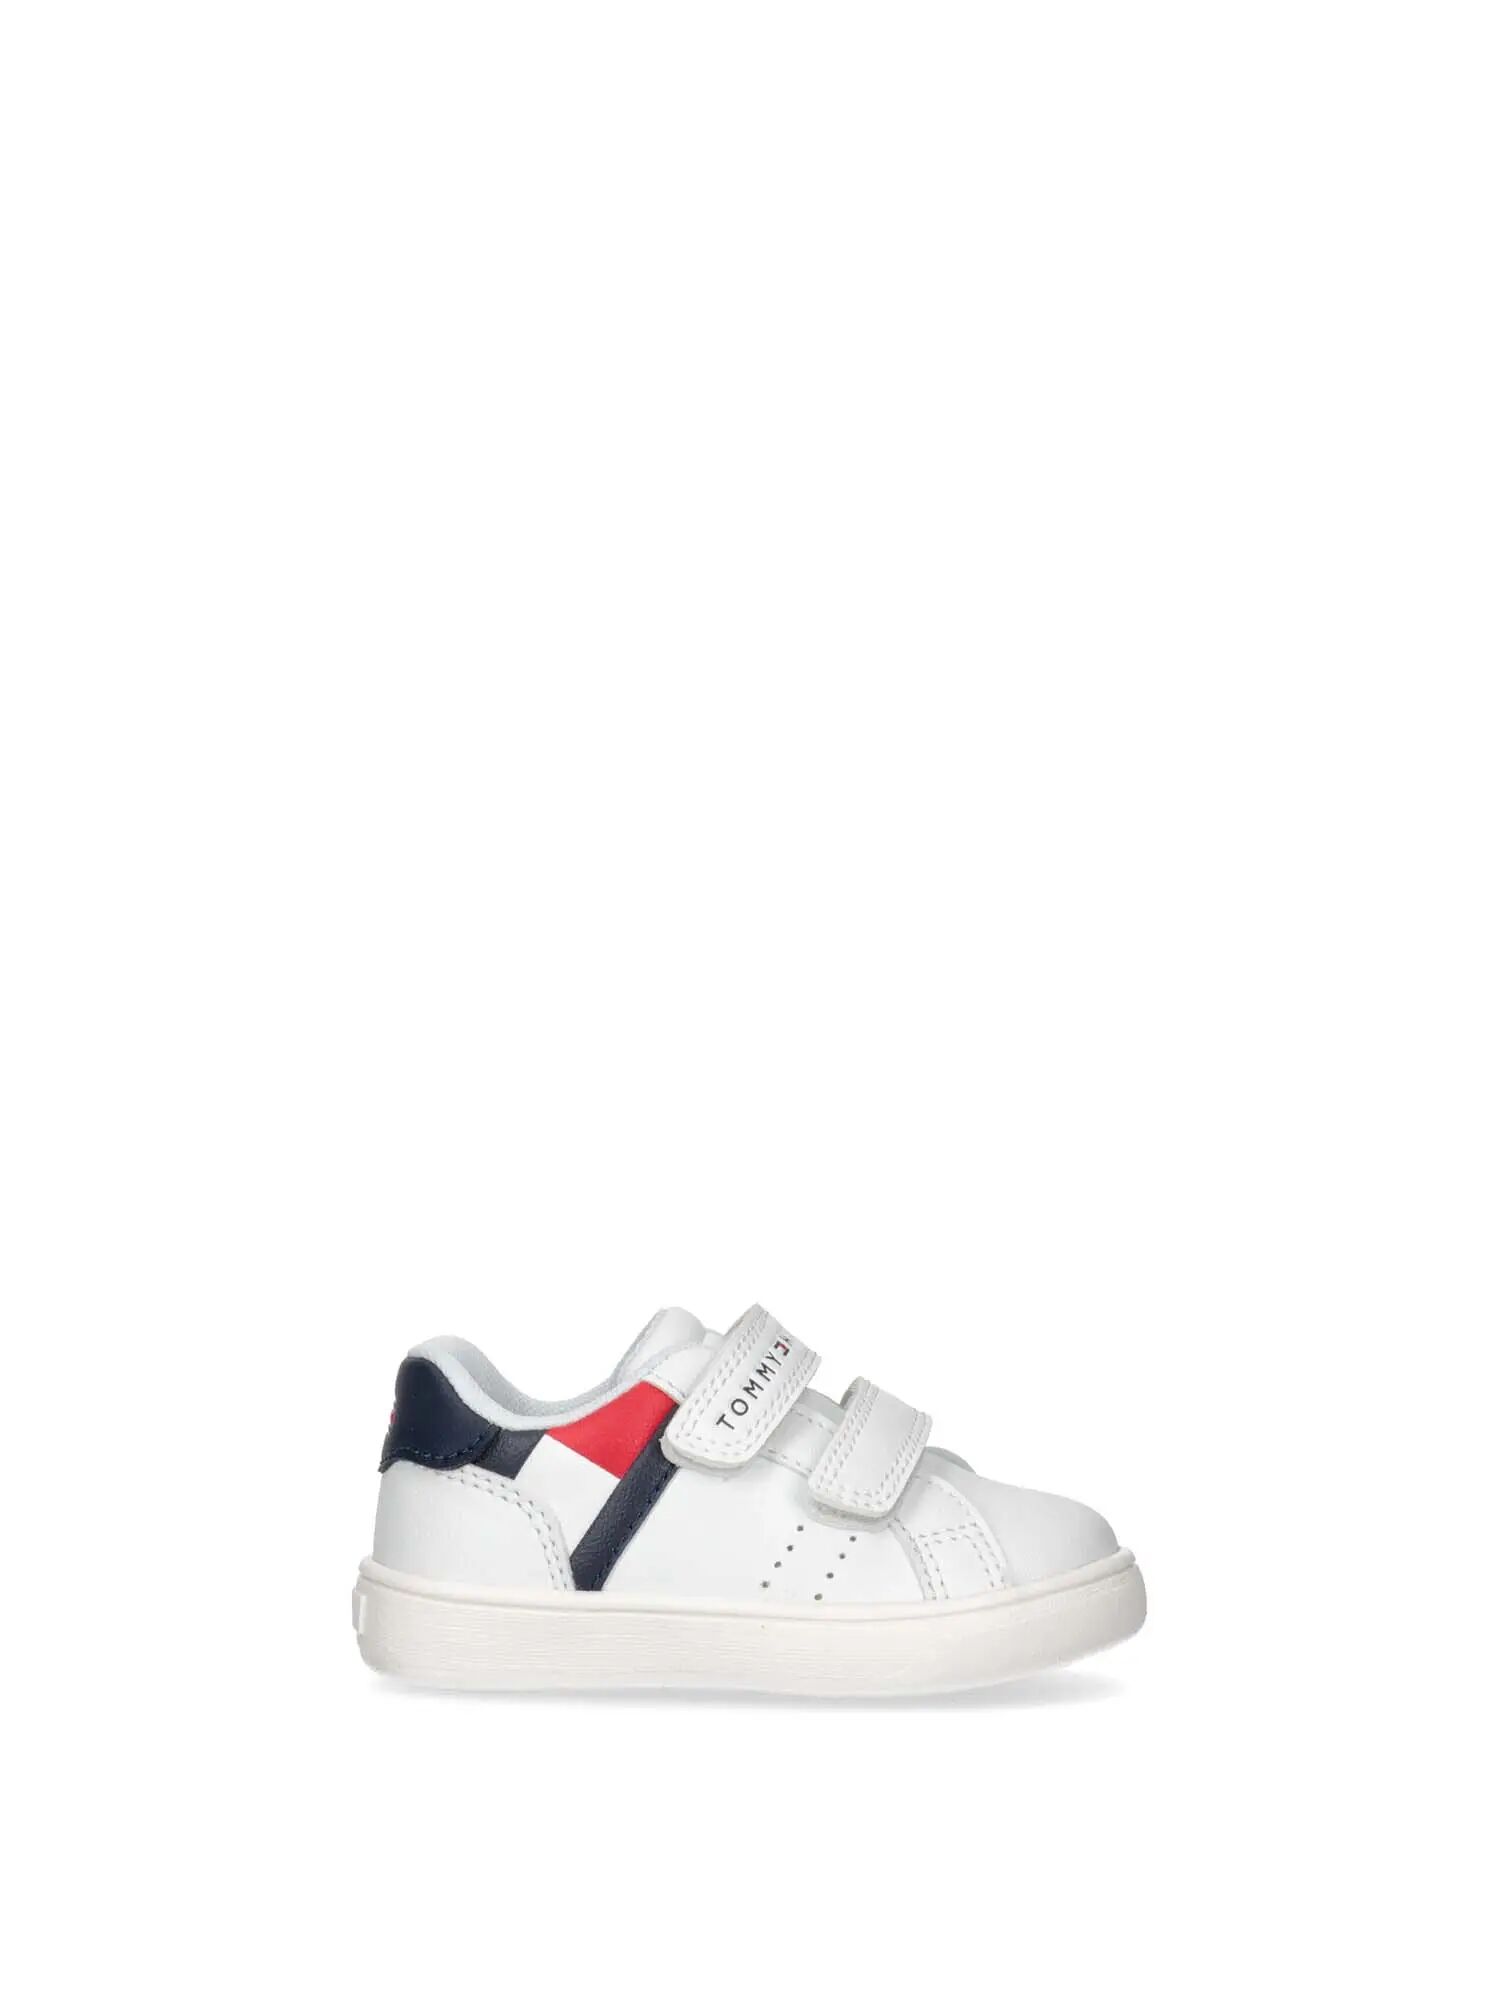 Tommy Hilfiger Sneakers Bianche Bambino BIANCO 29